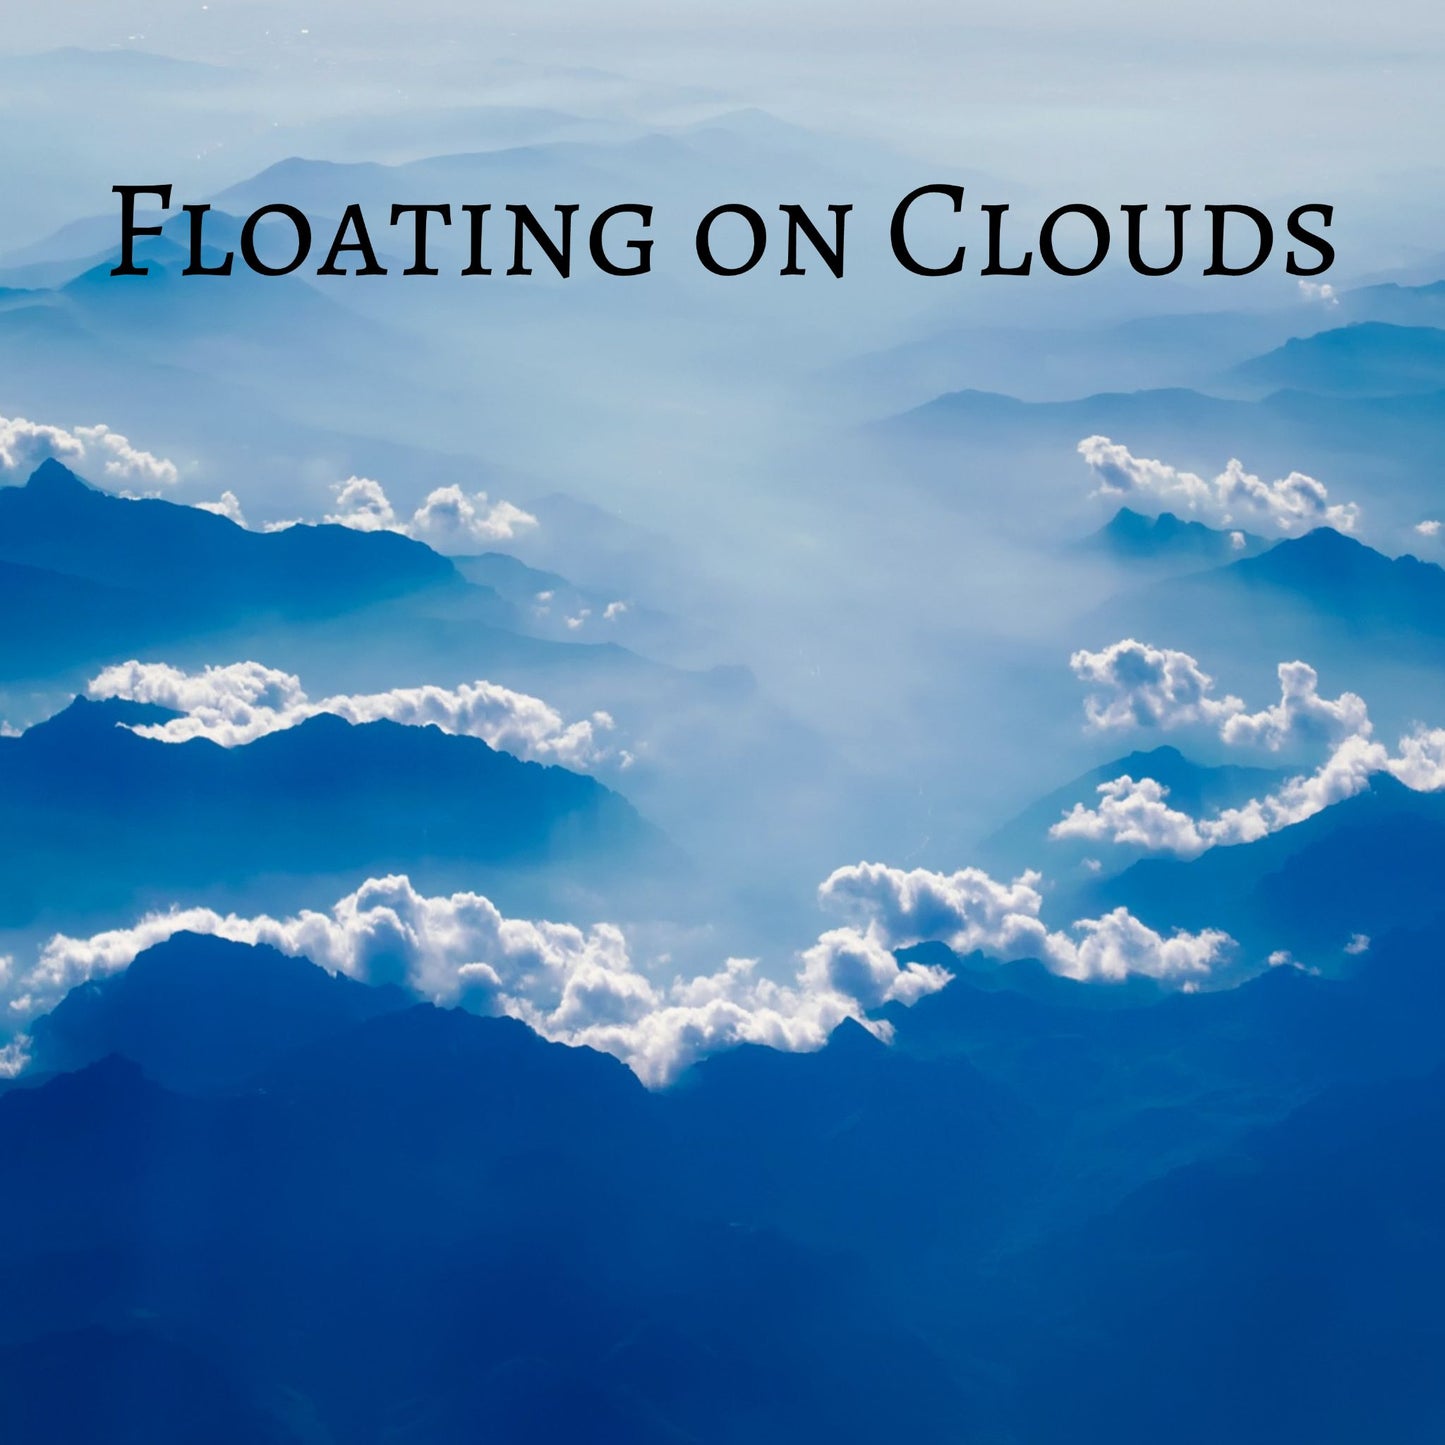 CD Cover of song Floating on Clouds